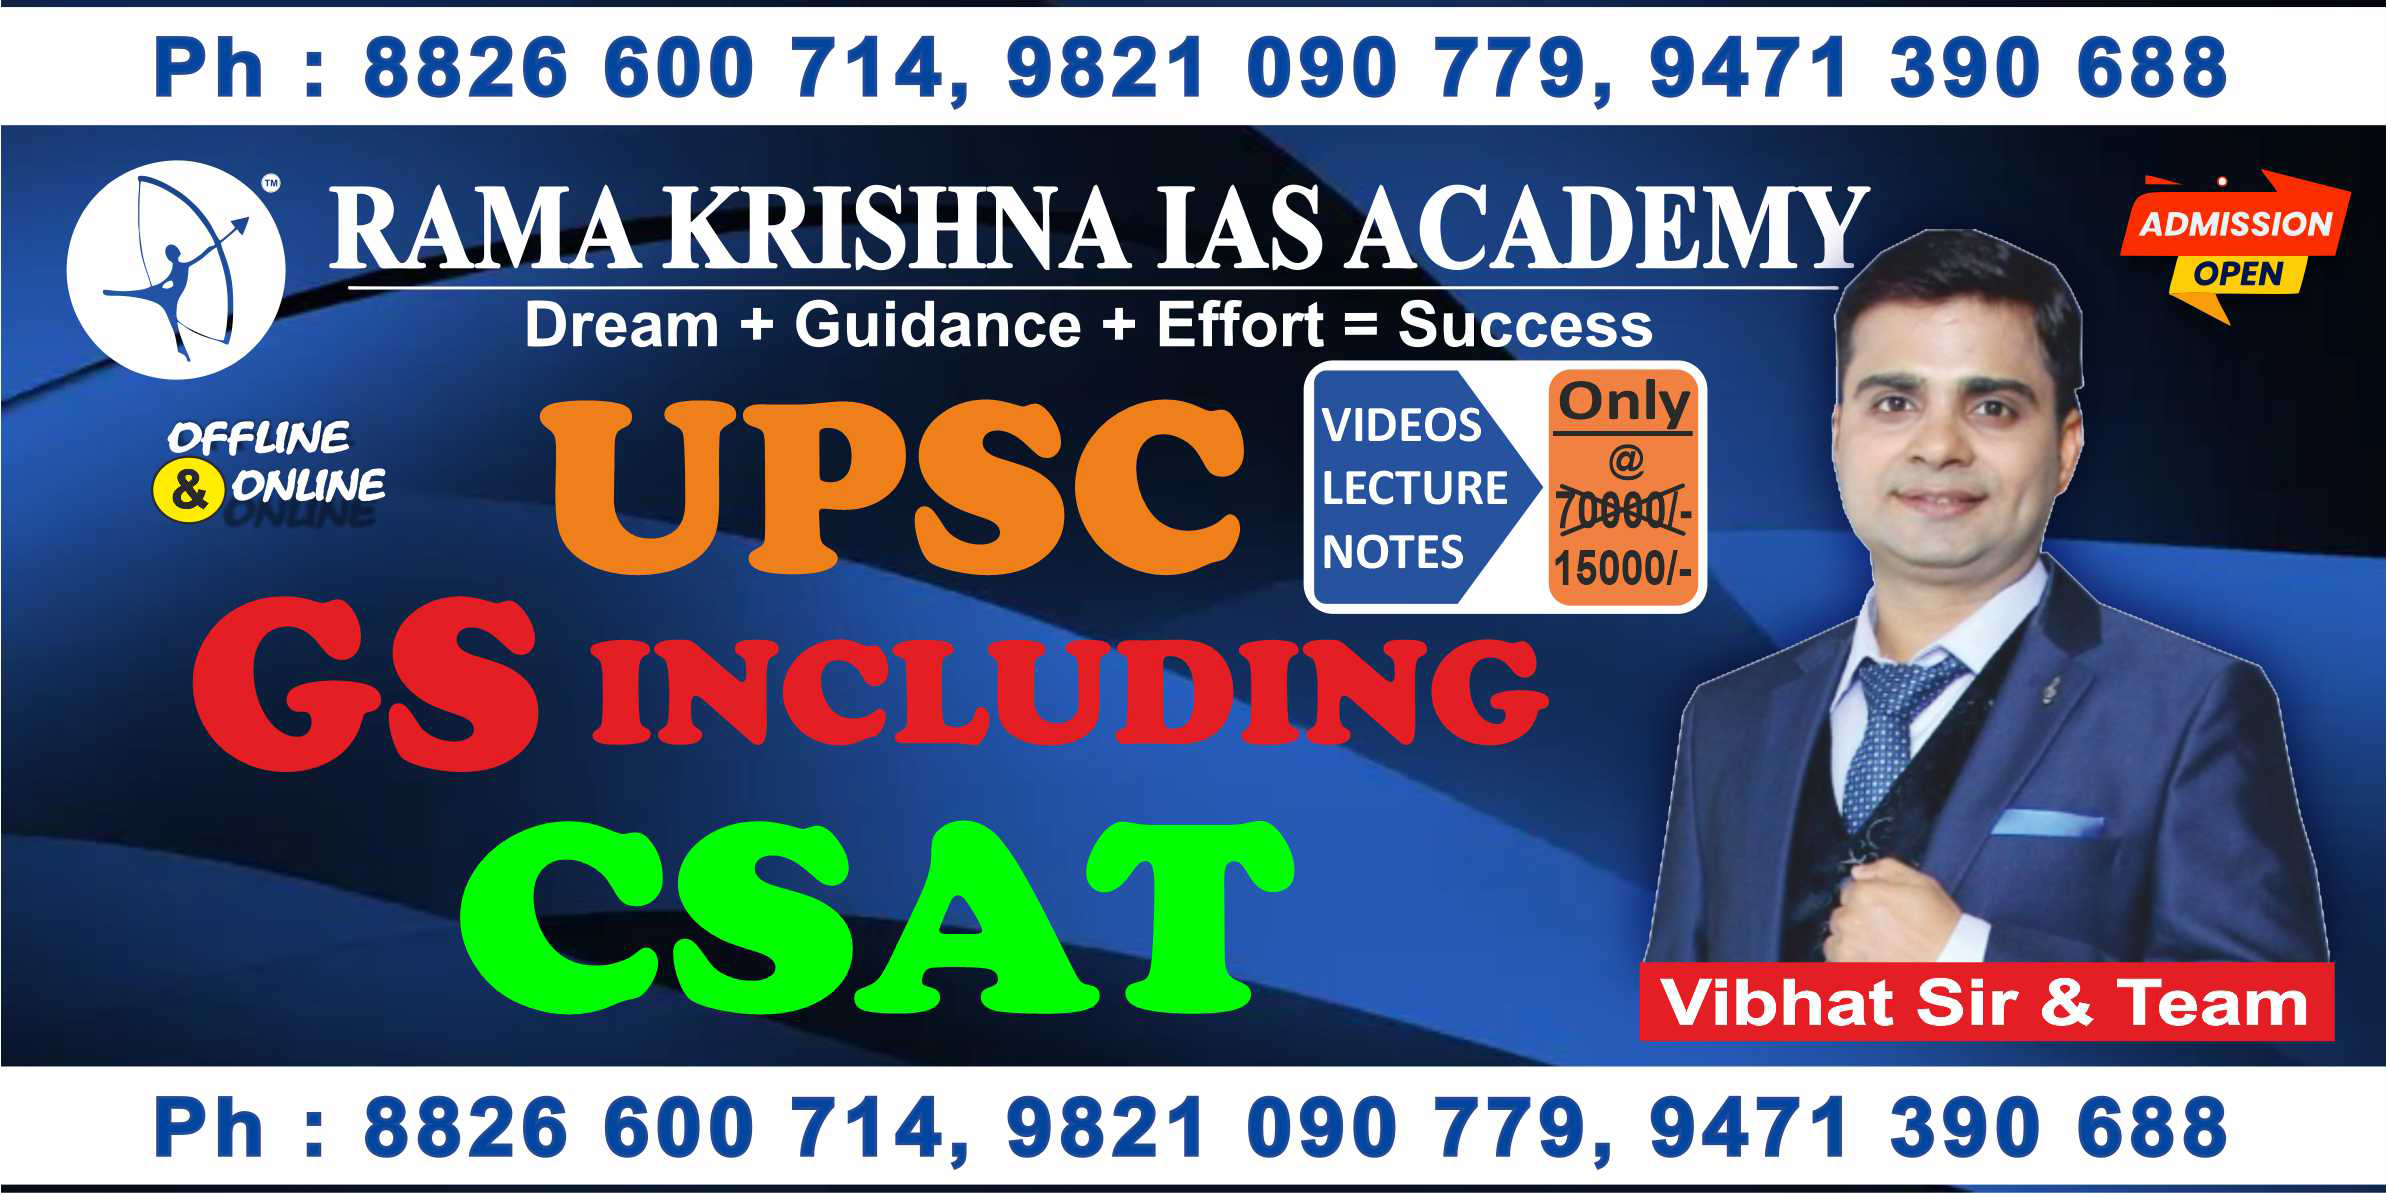 UPSC GS Including CSAT - offered by Rama Krishna IAS Academy